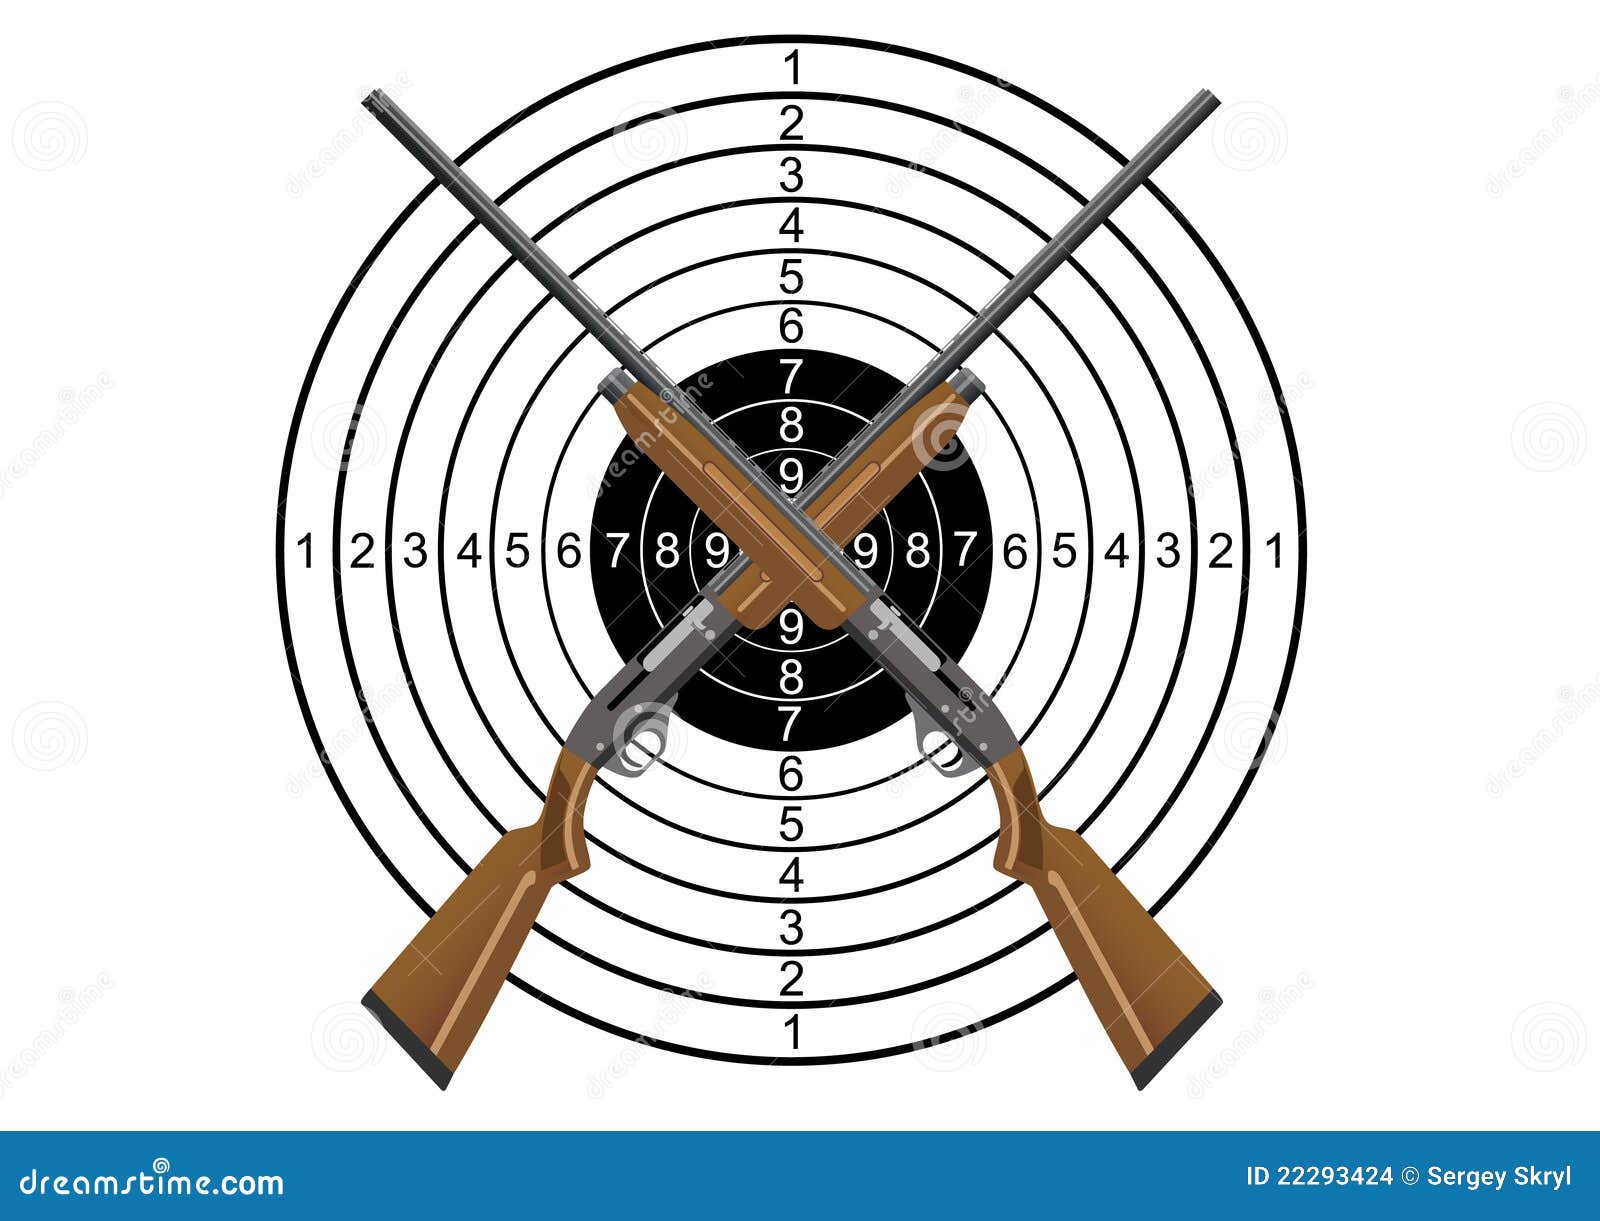 hunting target clipart - photo #22